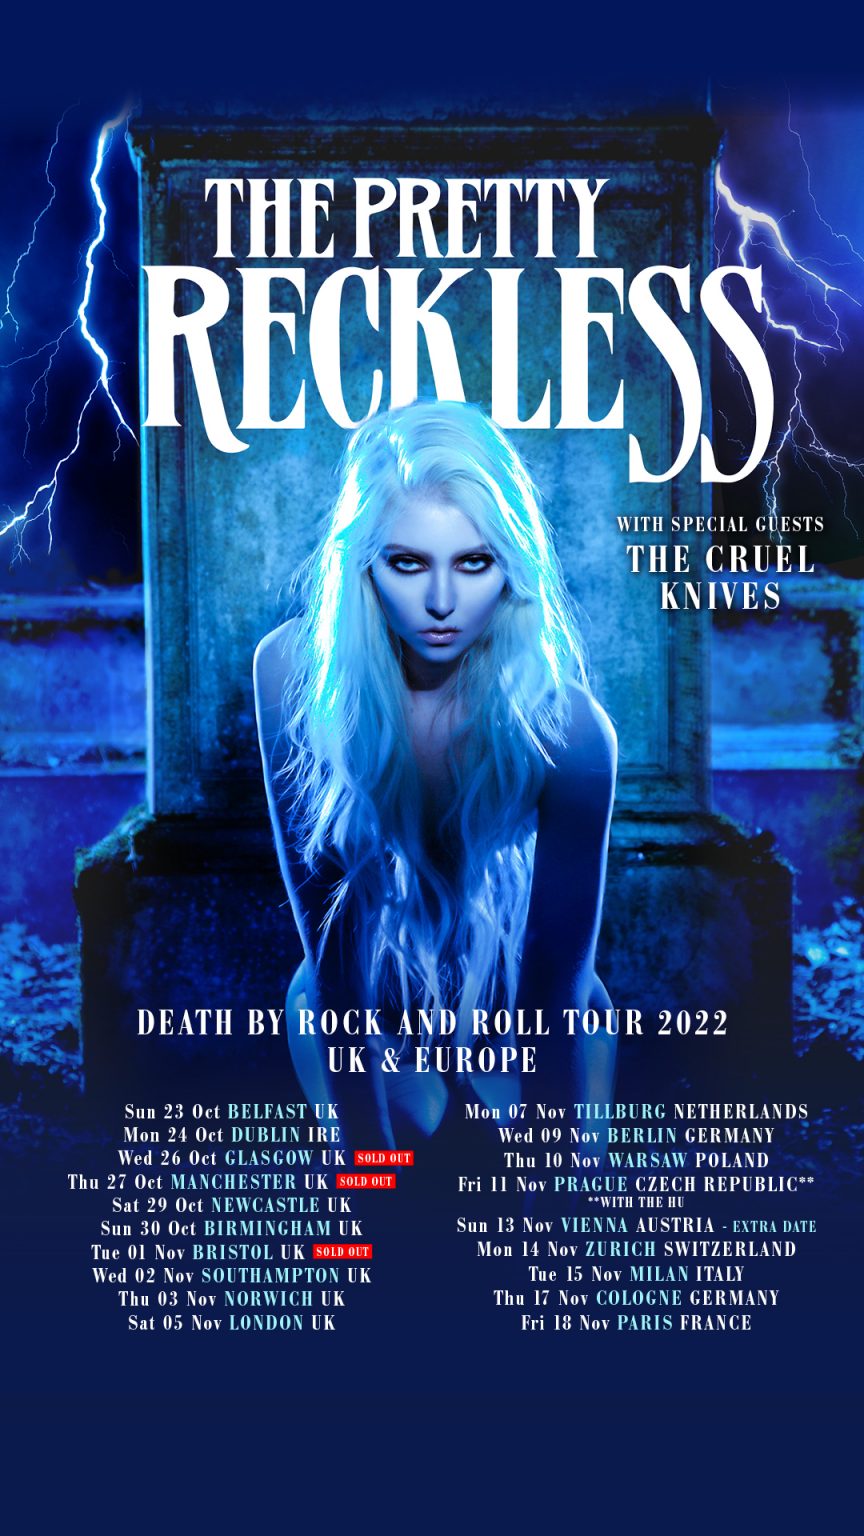 THE PRETTY RECKLESS ANNOUNCE DEATH BY ROCK AND ROLL TOUR UK & IRELAND